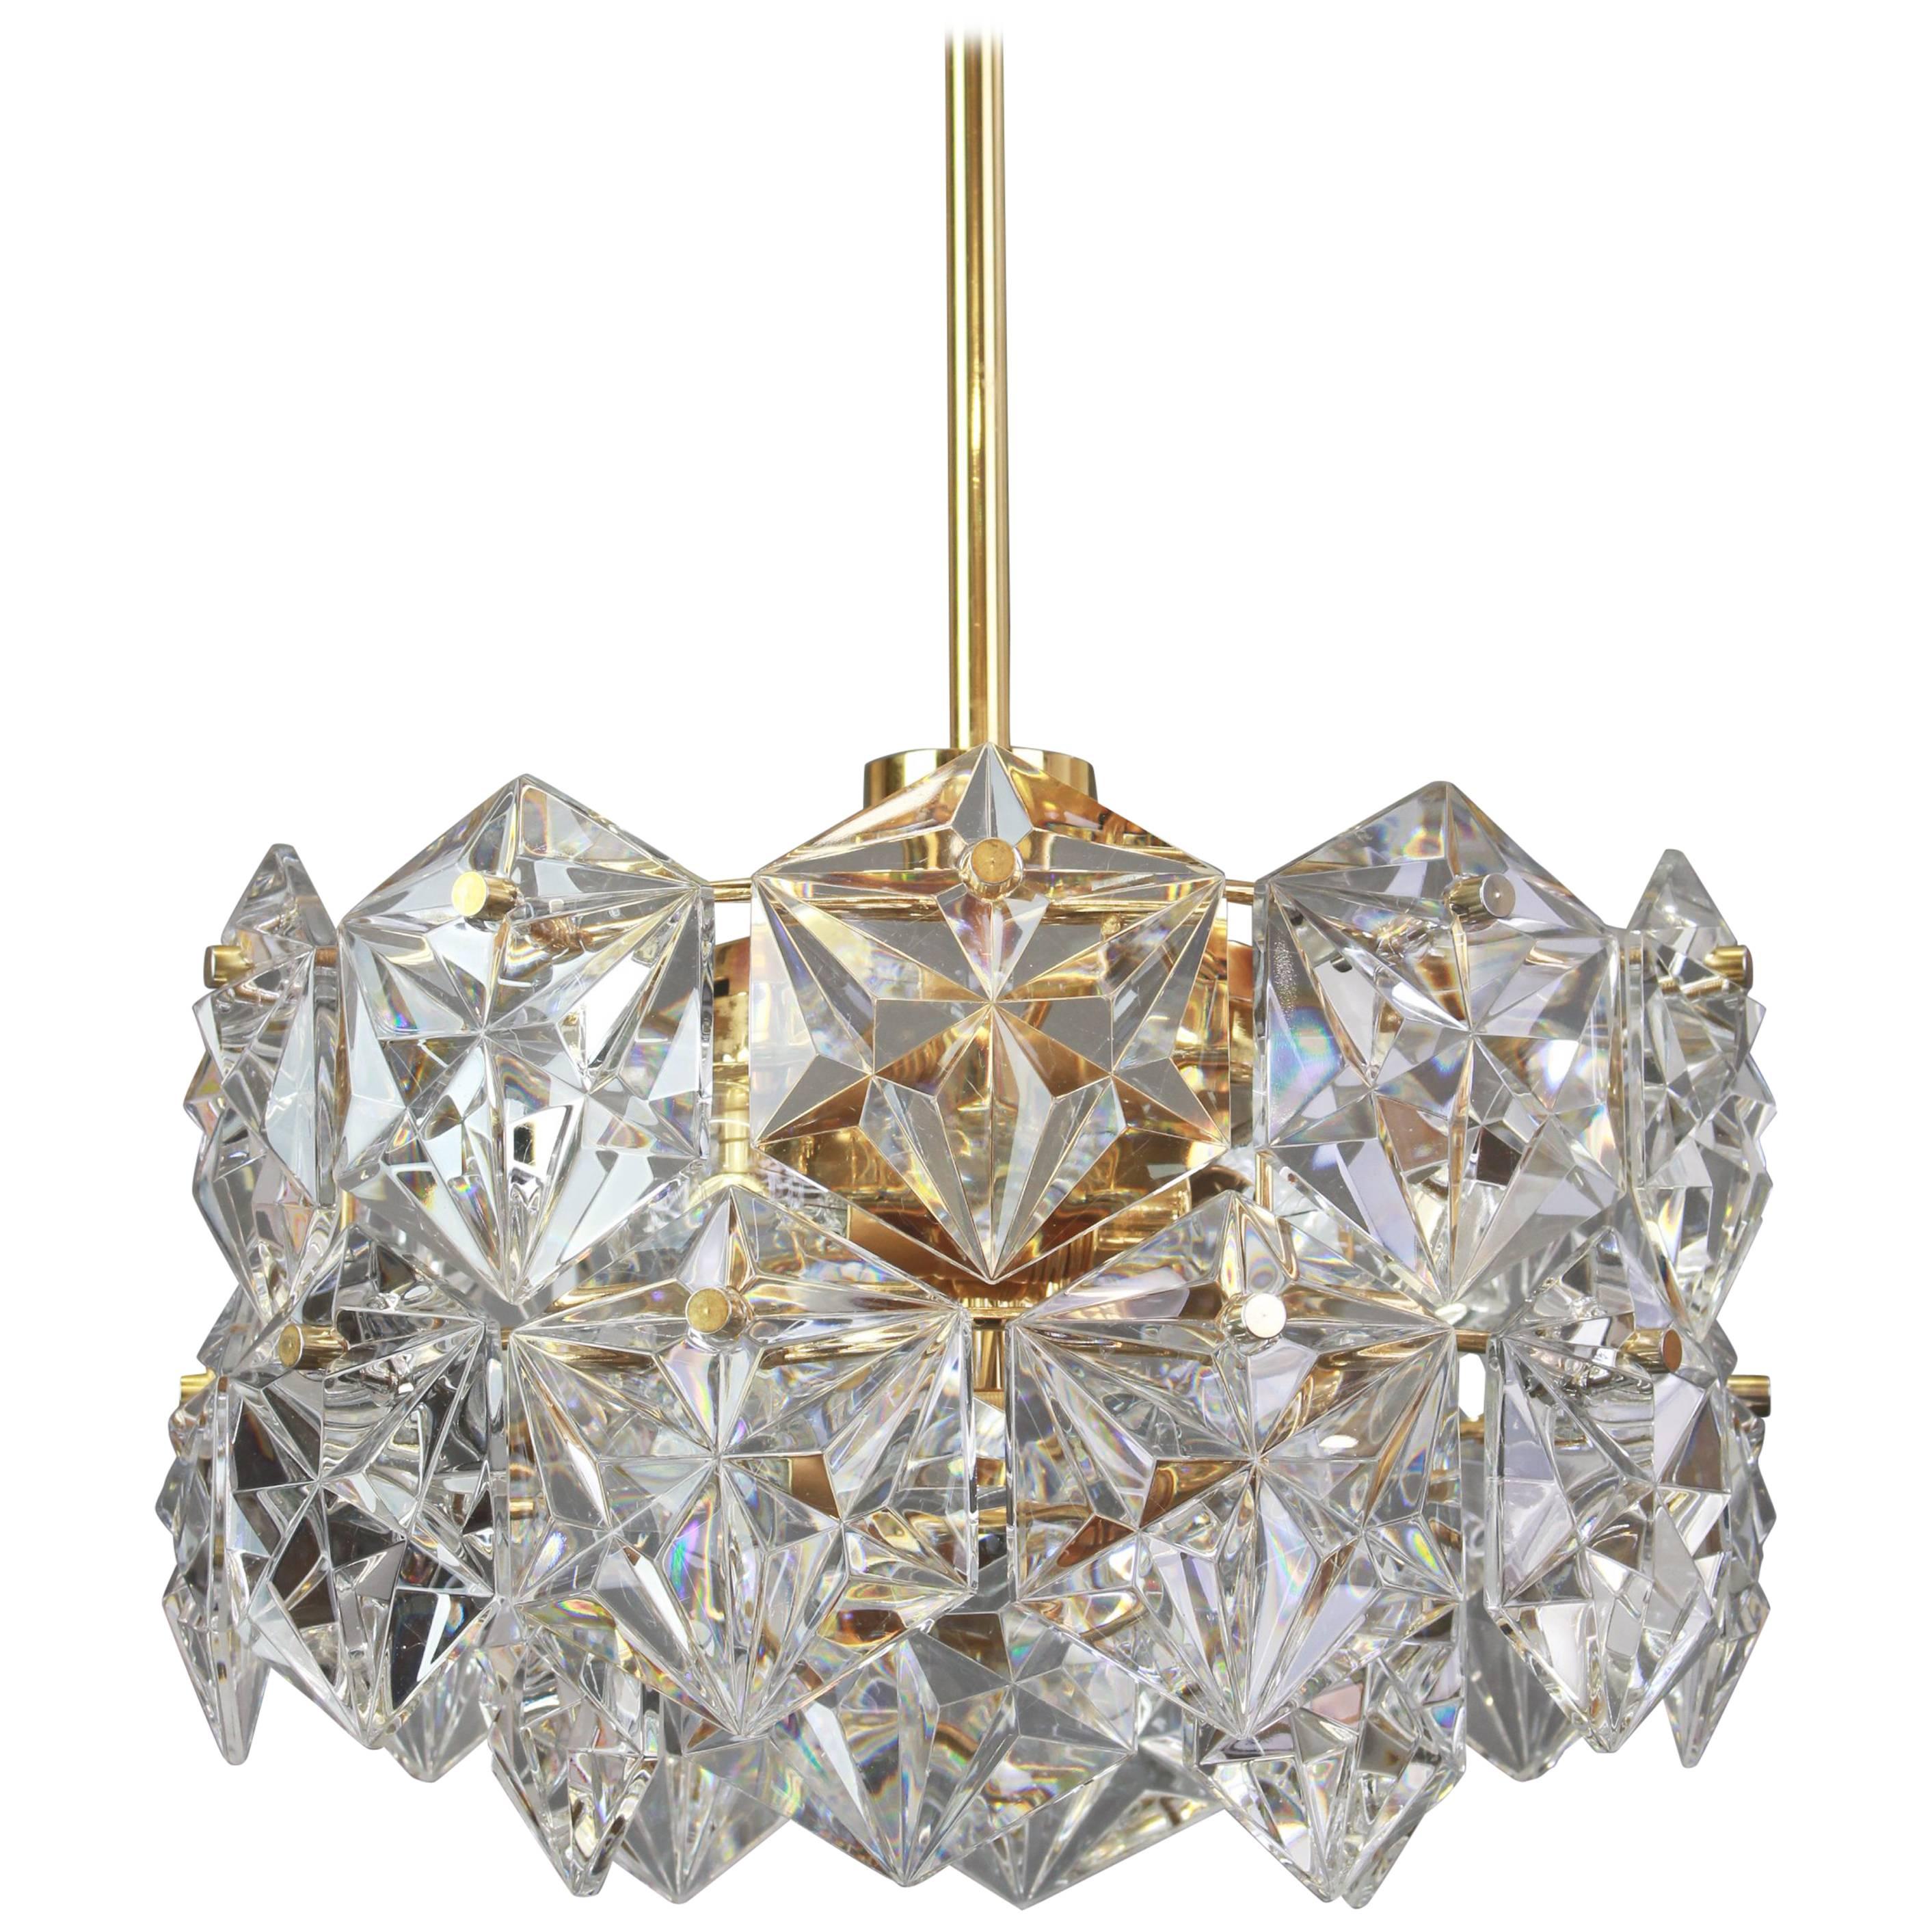 Two Stunning Chandelier, Brass and Crystal Glass by Kinkeldey, Germany, 1970